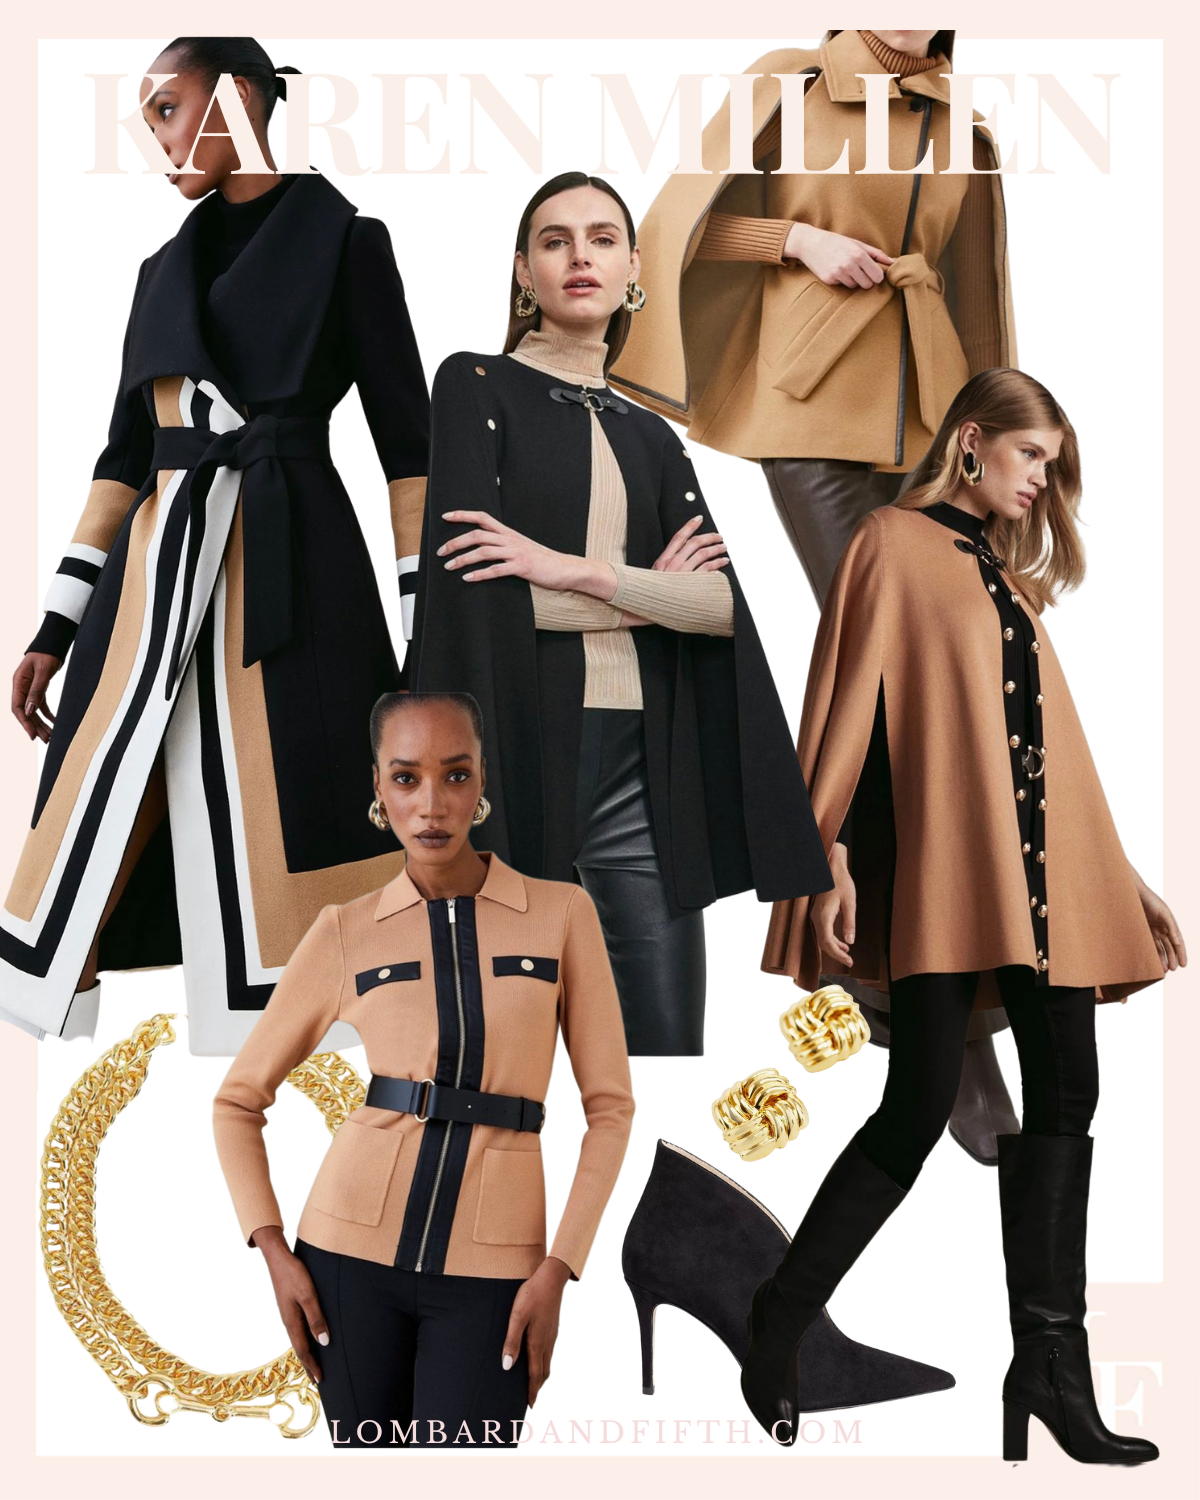 Karen Millen workwear favorites, pre-fall style inspiration, neutral fall looks, by Veronica Levy, Lombard & Fifth.